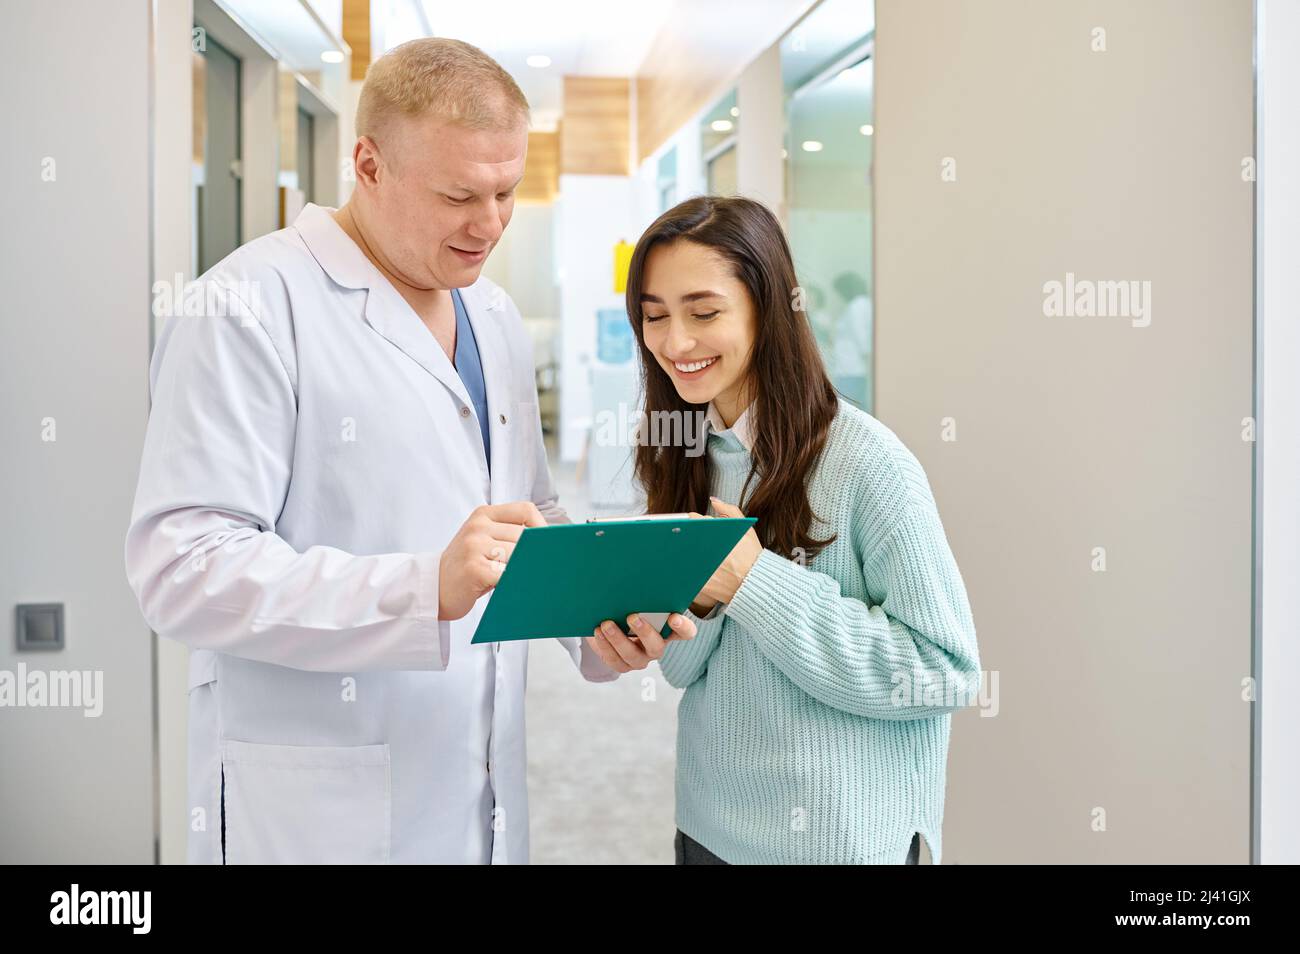 Doctor and patient discussing medical checkup results Stock Photo